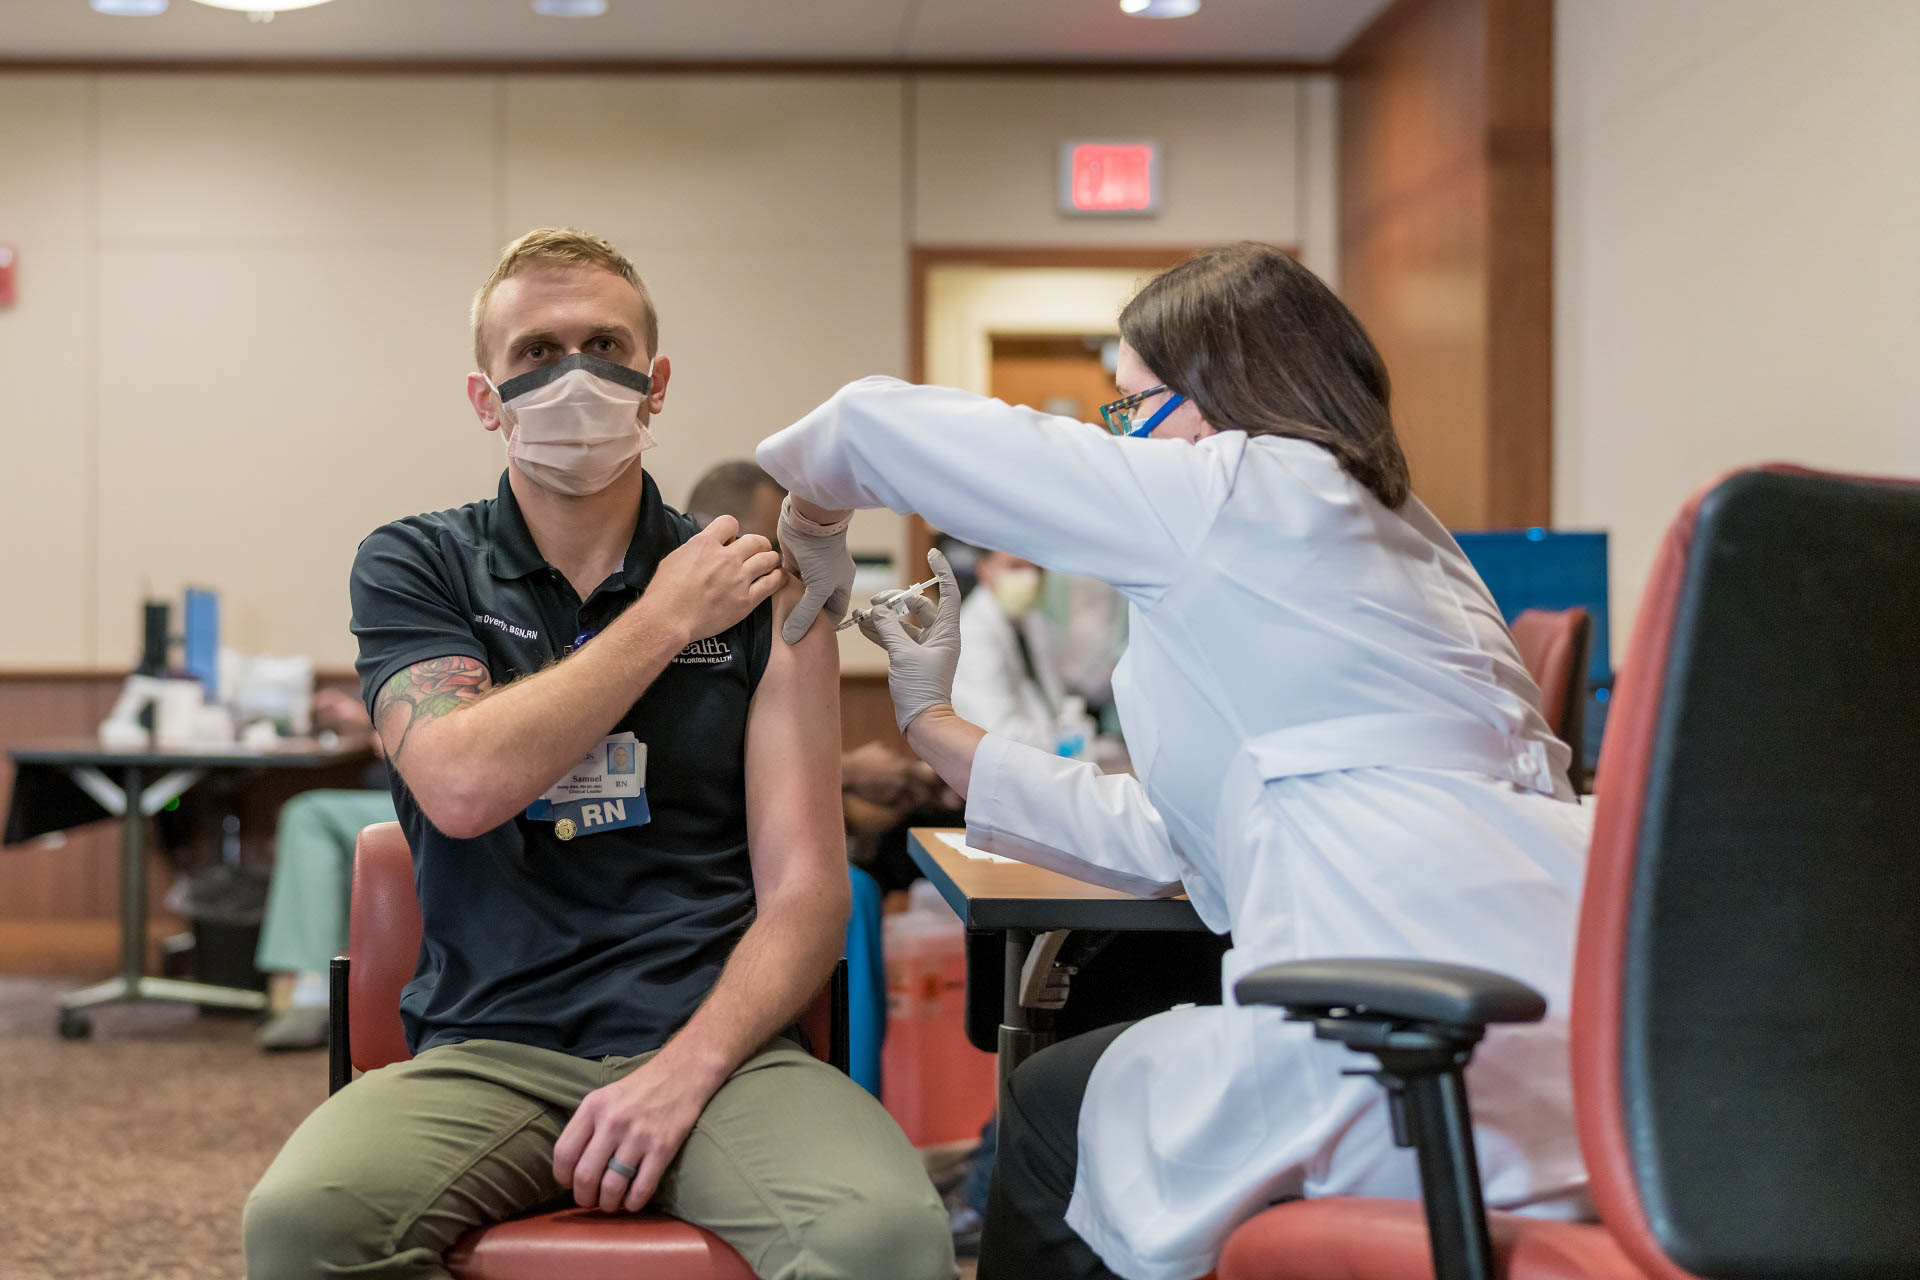 "I think it’s a step toward getting back to some kind of normal," said Samuel J. Overly, B.S.N., R.N.-B.C., a trauma nurse and clinical leader in the UF Health adult emergency department, after receiving the inaugural vaccination.